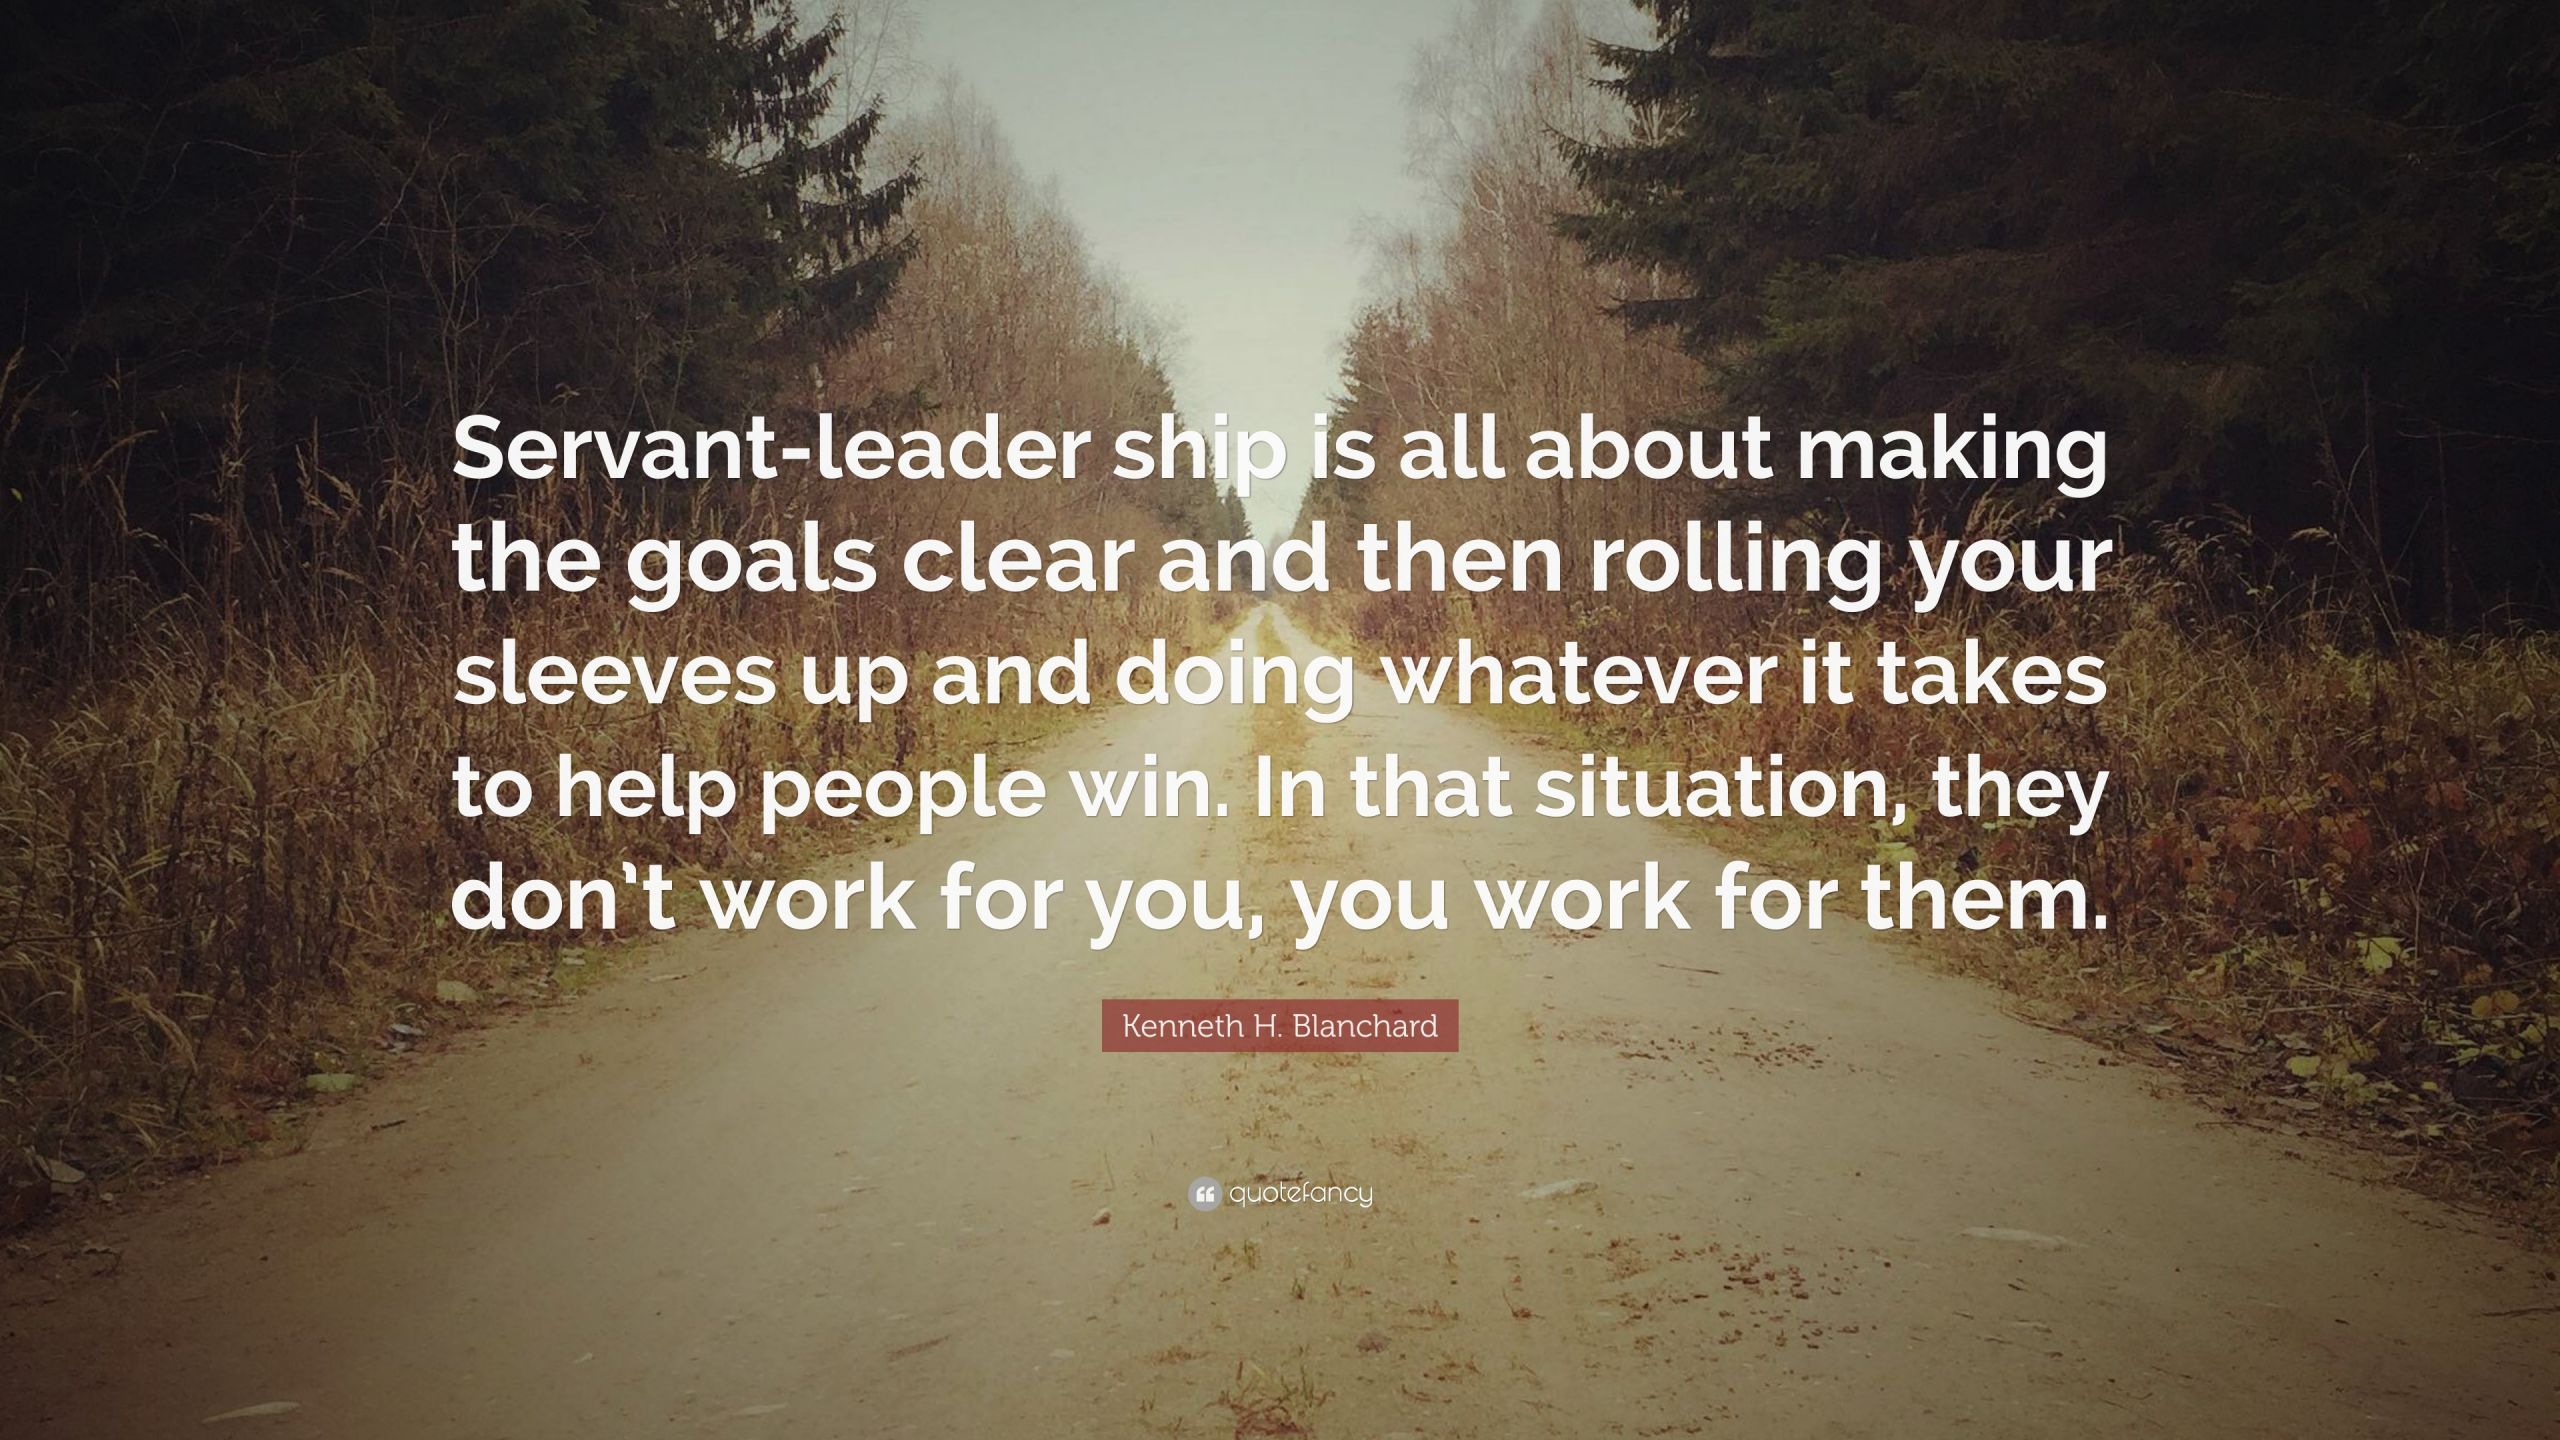 Quotes About Service And Leadership
 Kenneth H Blanchard Quote “Servant leader ship is all